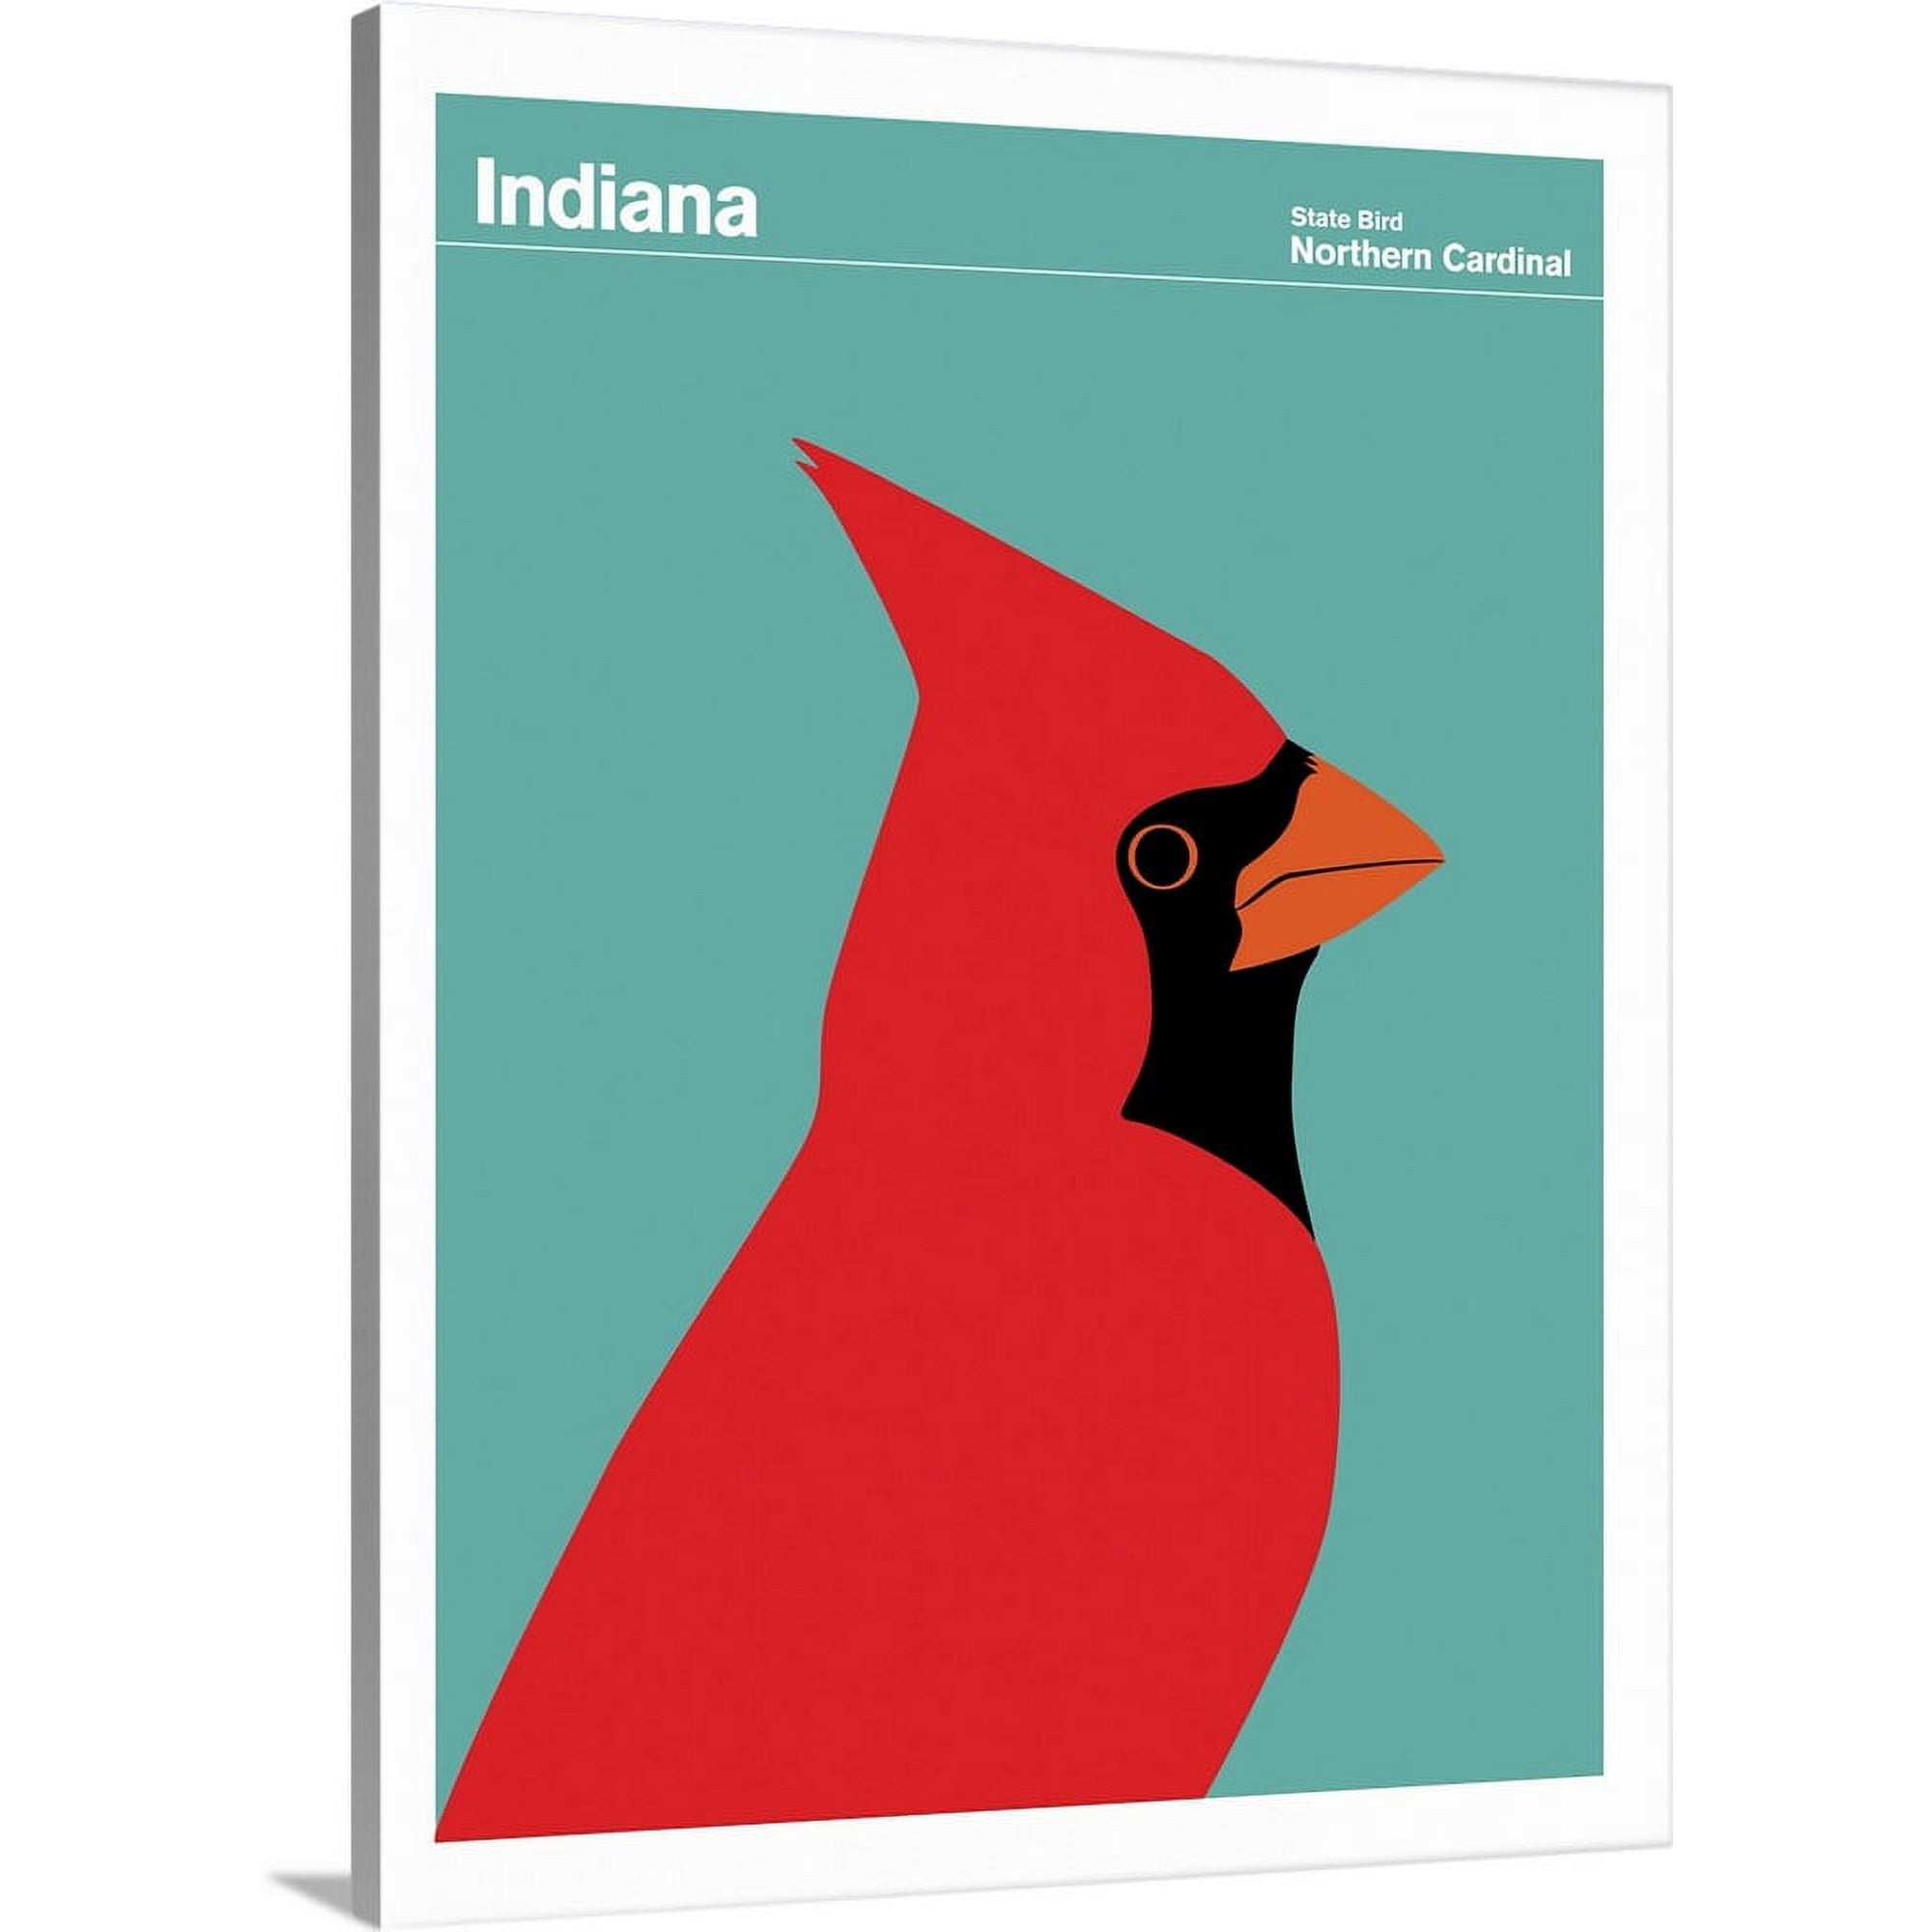 Great BIG Canvas | State Posters - Indiana State Bird: Northern Cardinal  Canvas Wall Art - 18x24